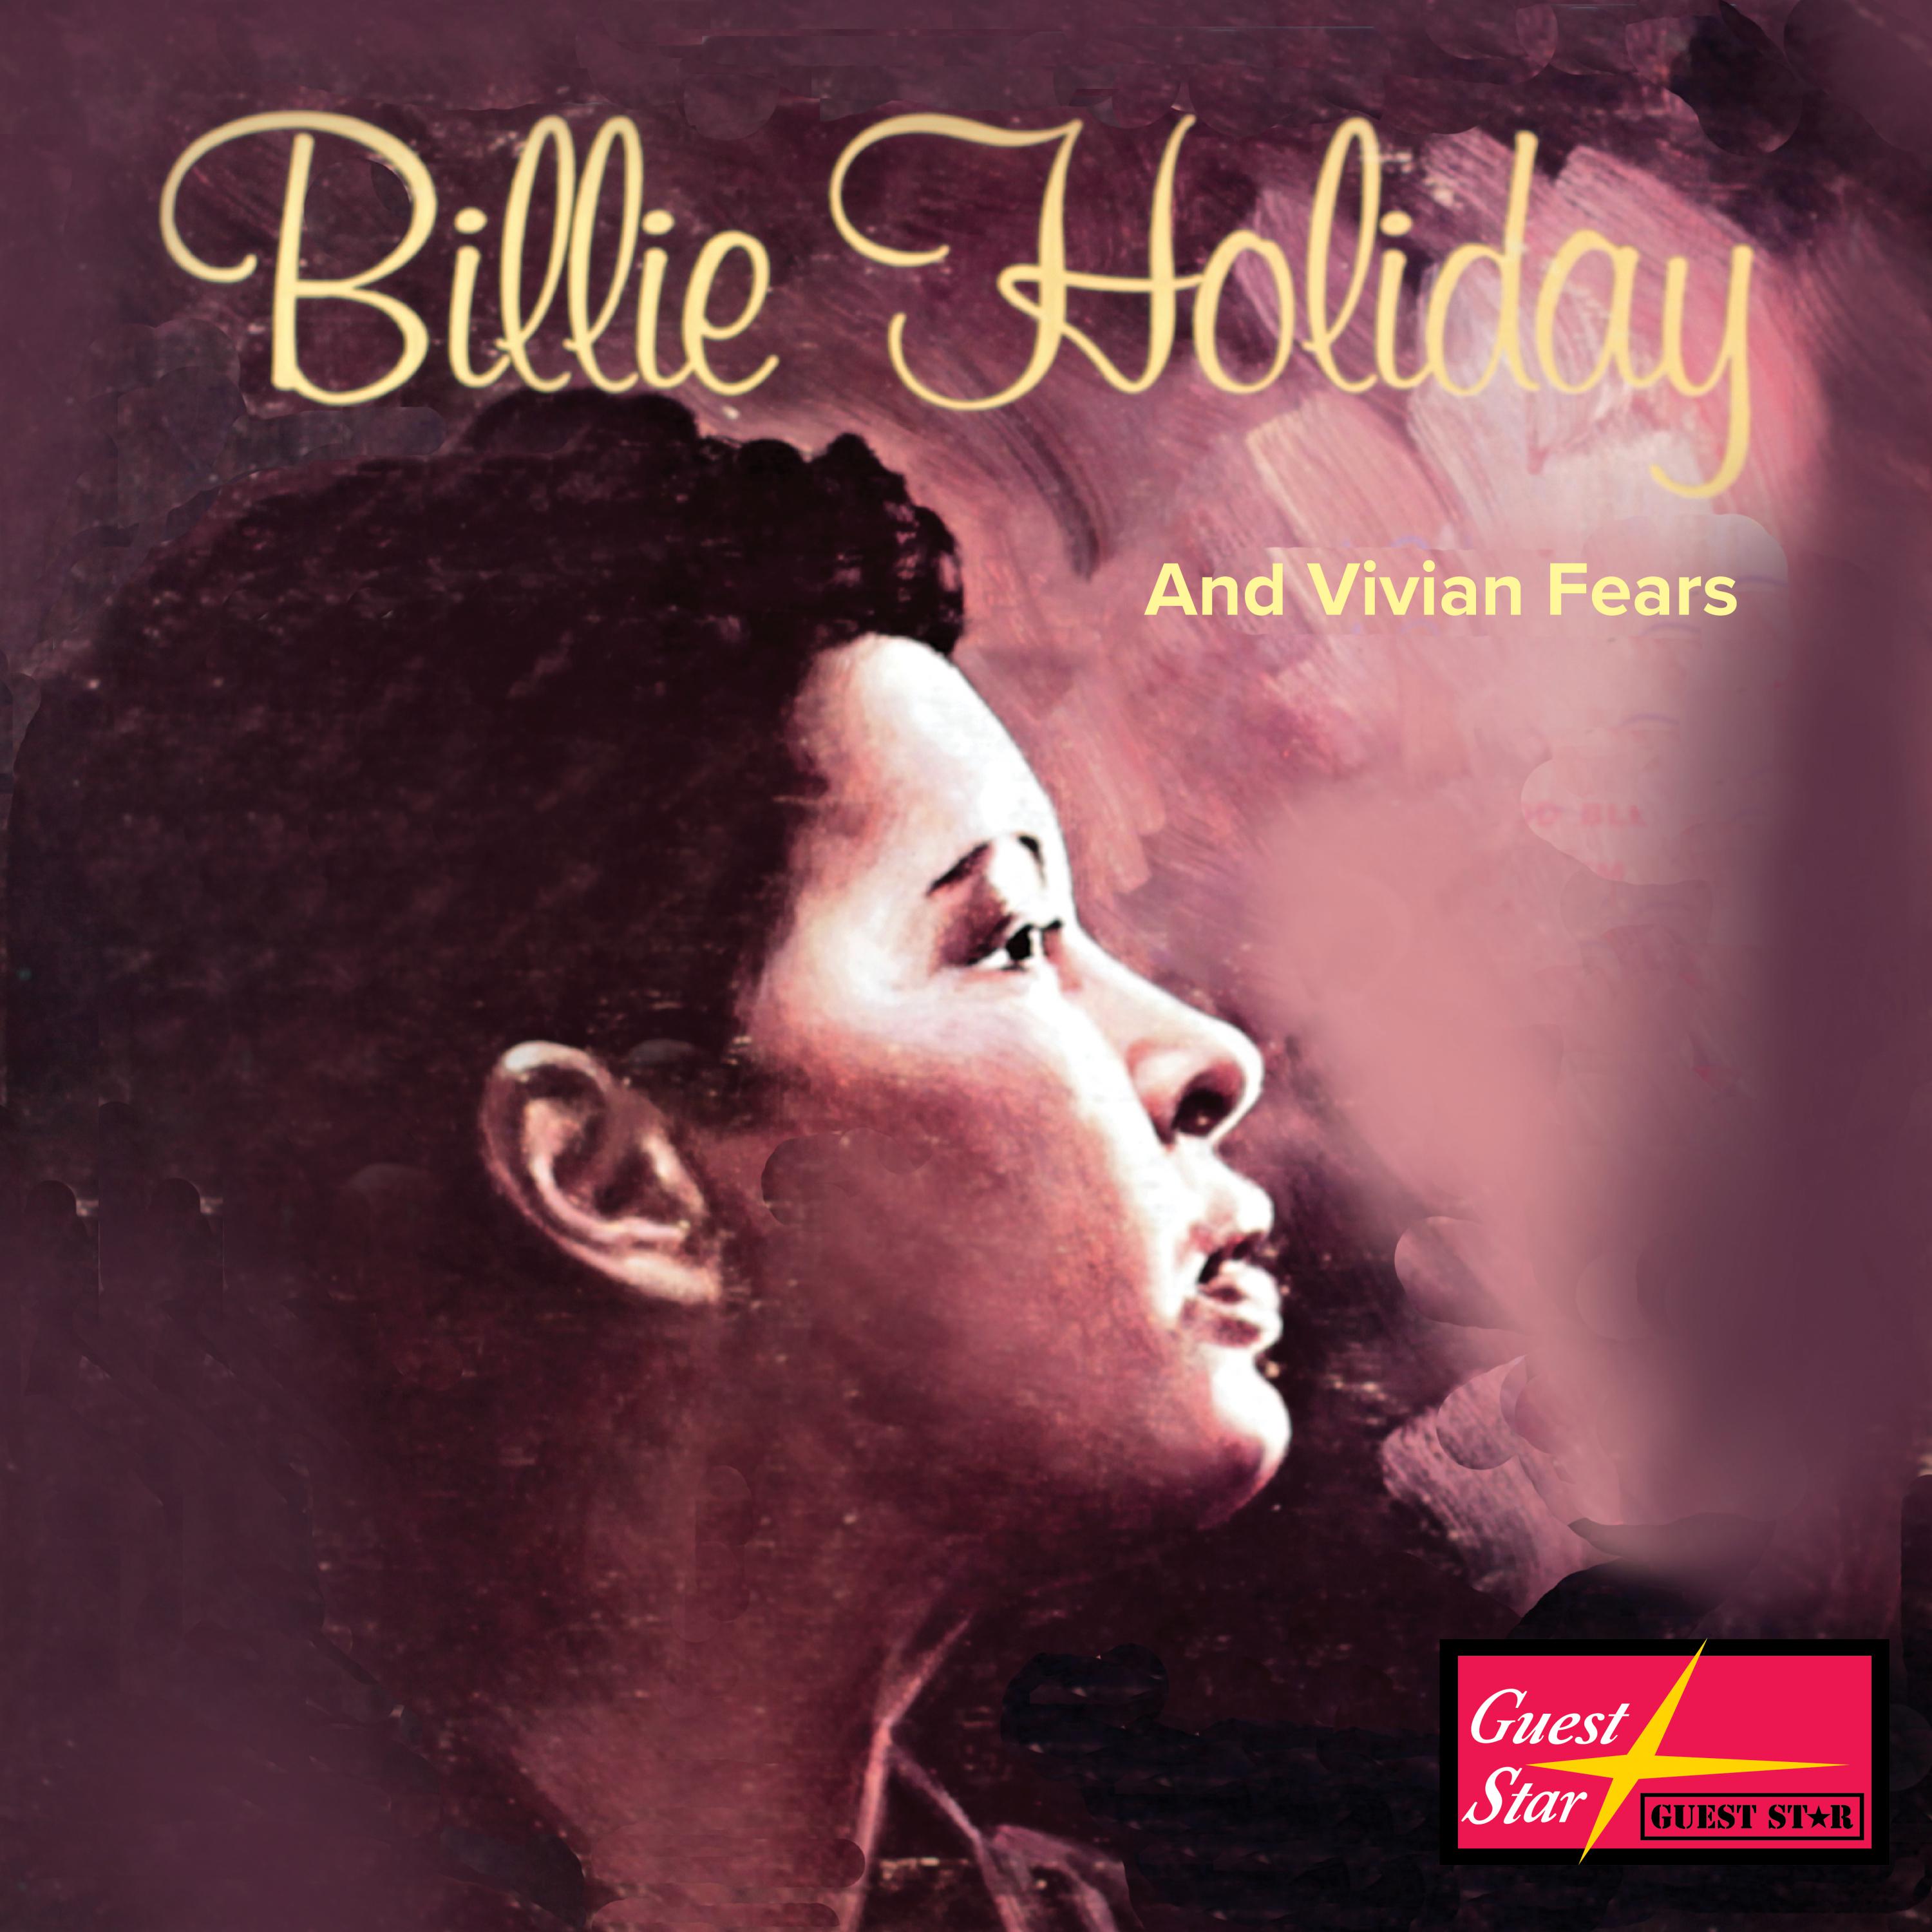 Billie Holiday and Vivian Fears